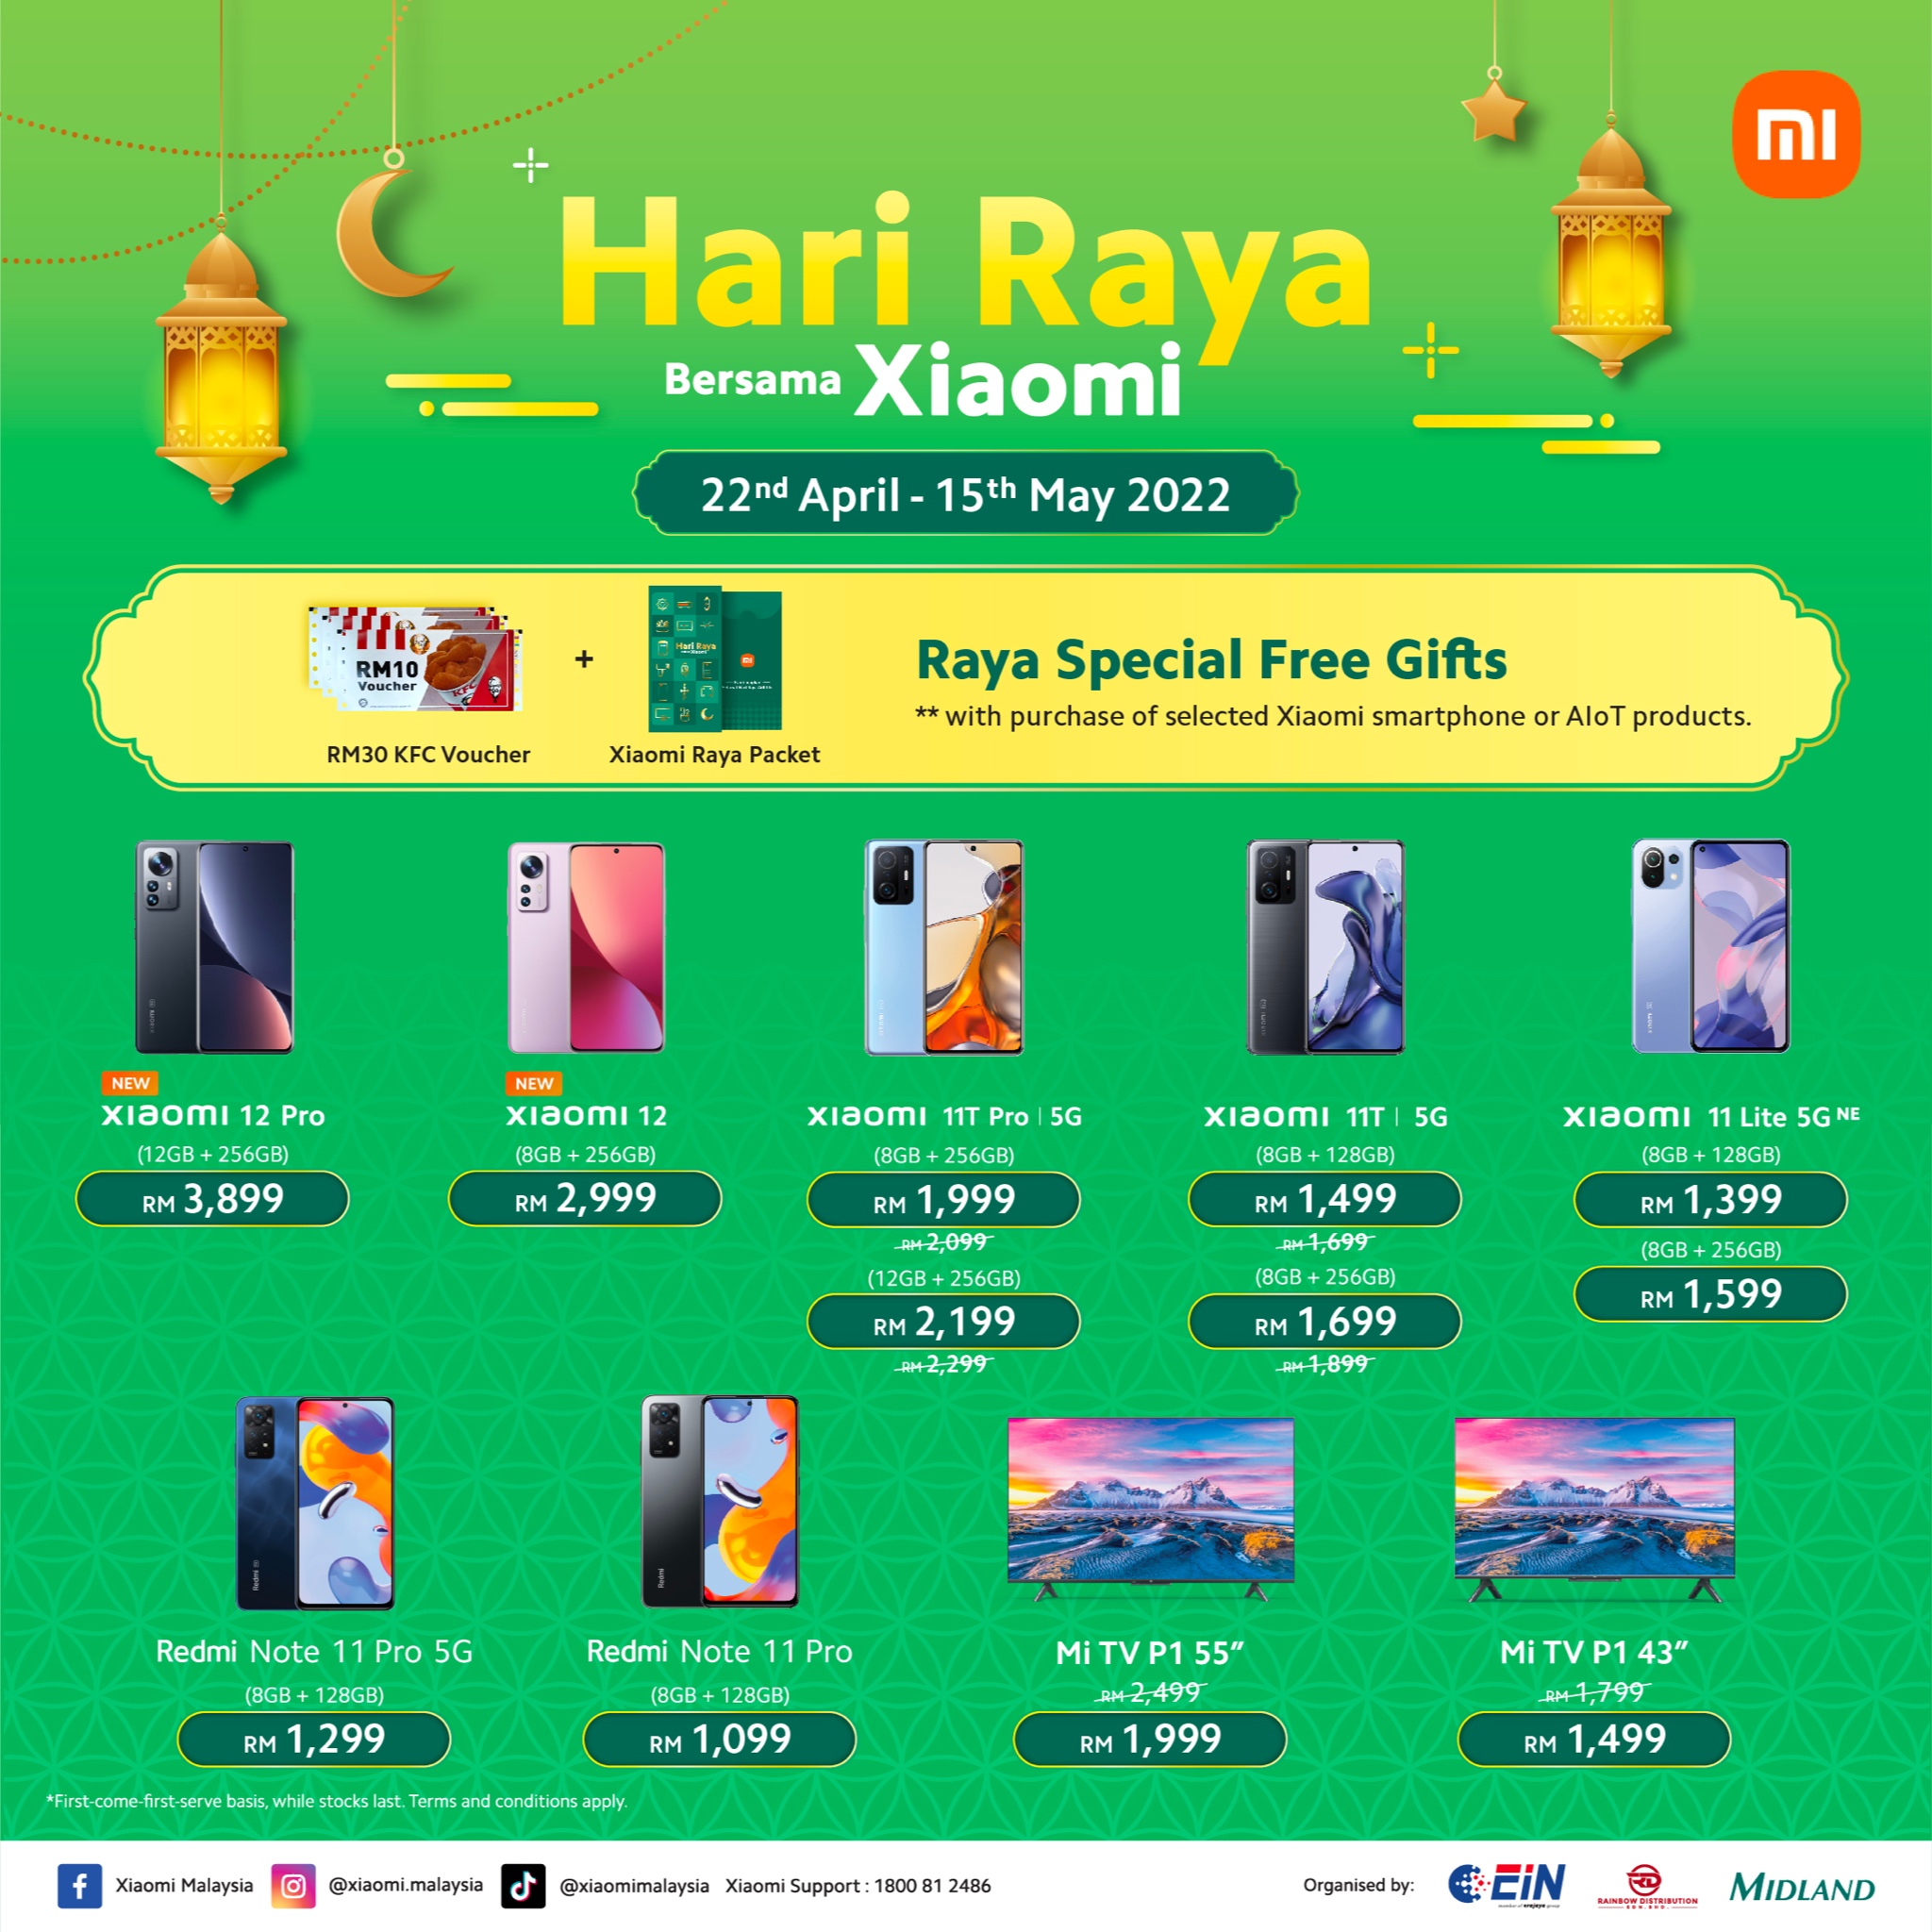 Celebrate this Raya with Maybank offerings